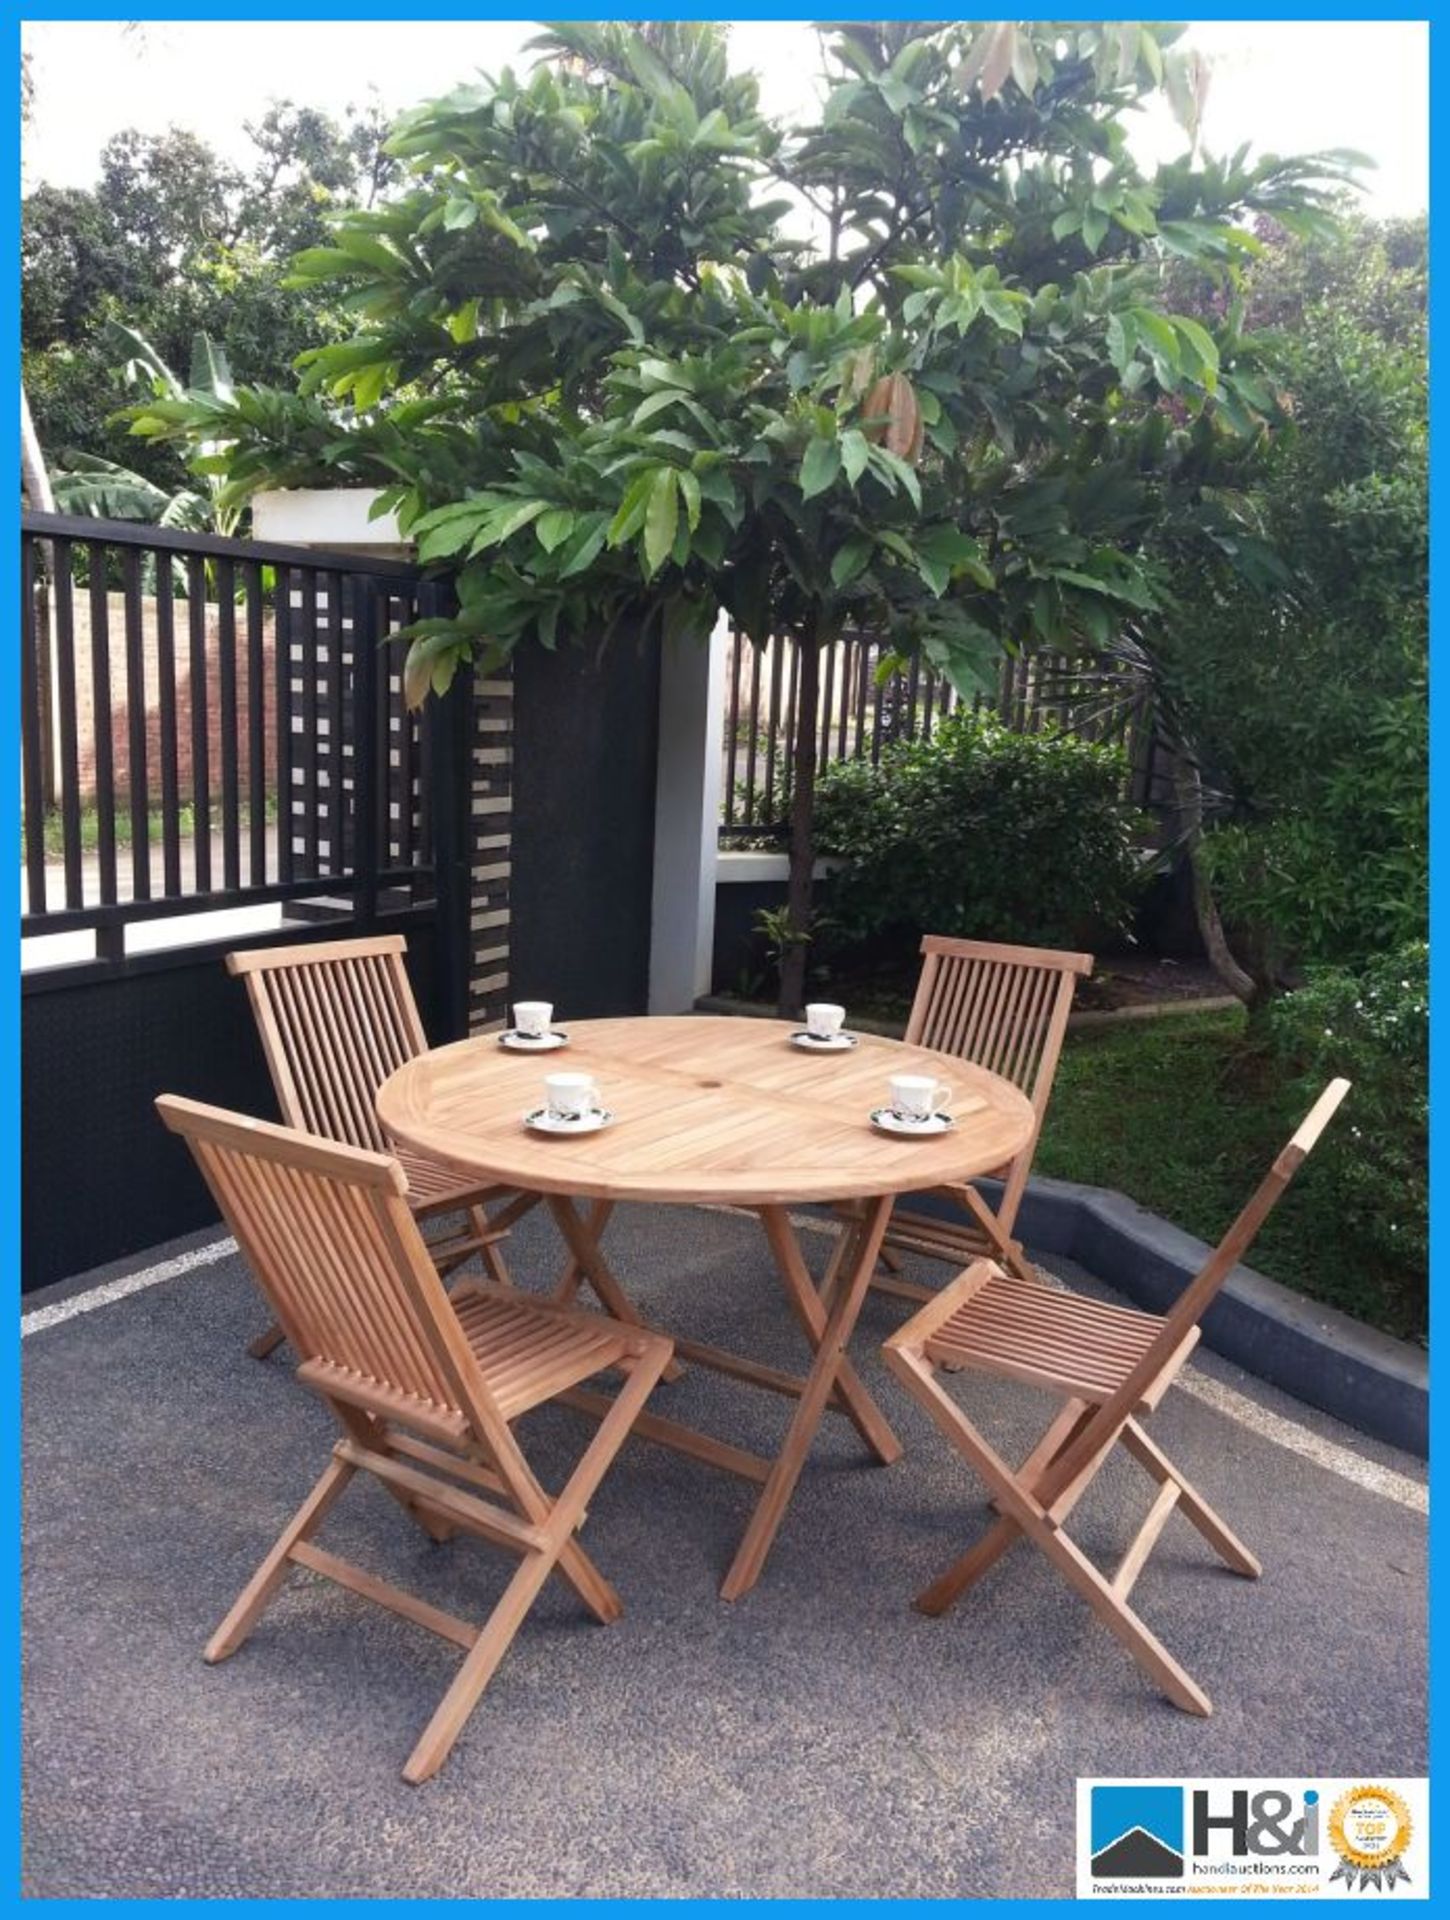 120 CM Teak Folding table set. This solid teak folding table & chairs set will give a beautiful